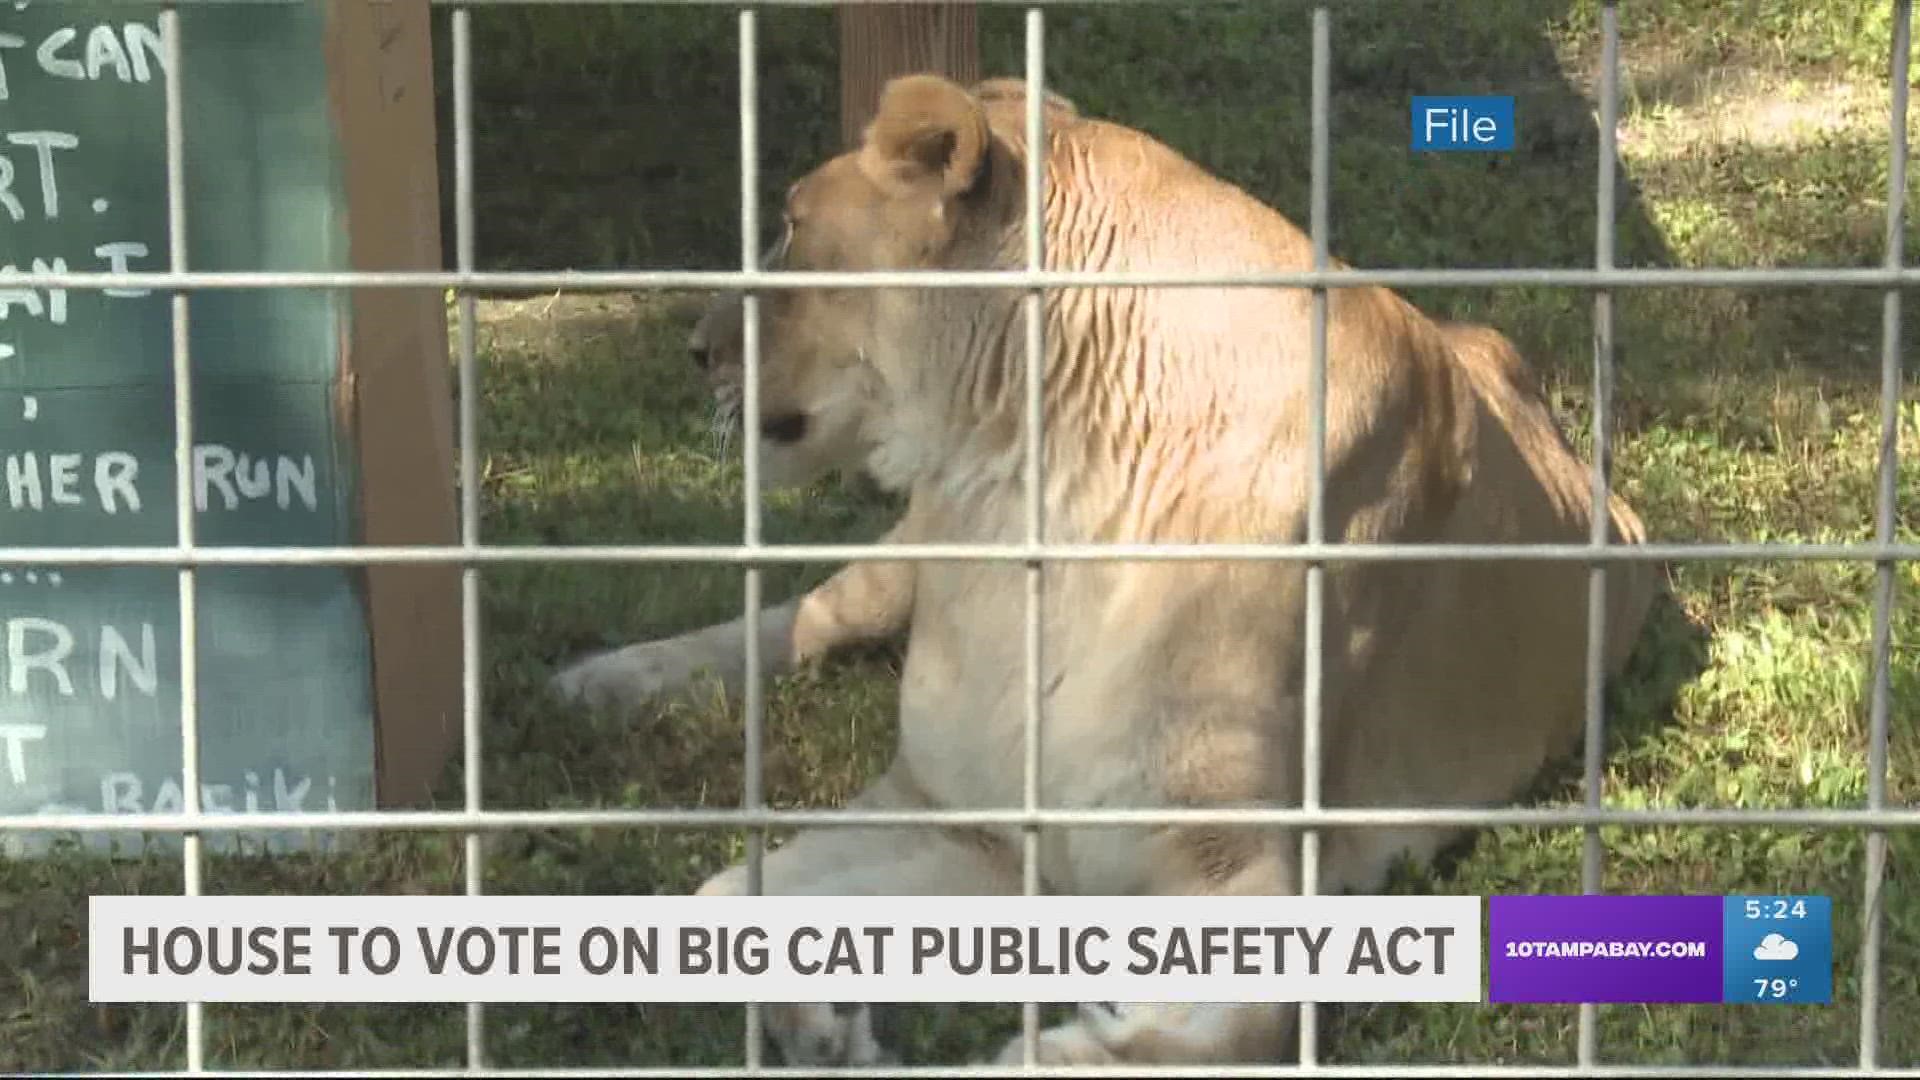 Back in 2020, the same bill that banned private ownership of big cats in the U.S. passed the House but didn't make it past the Senate.